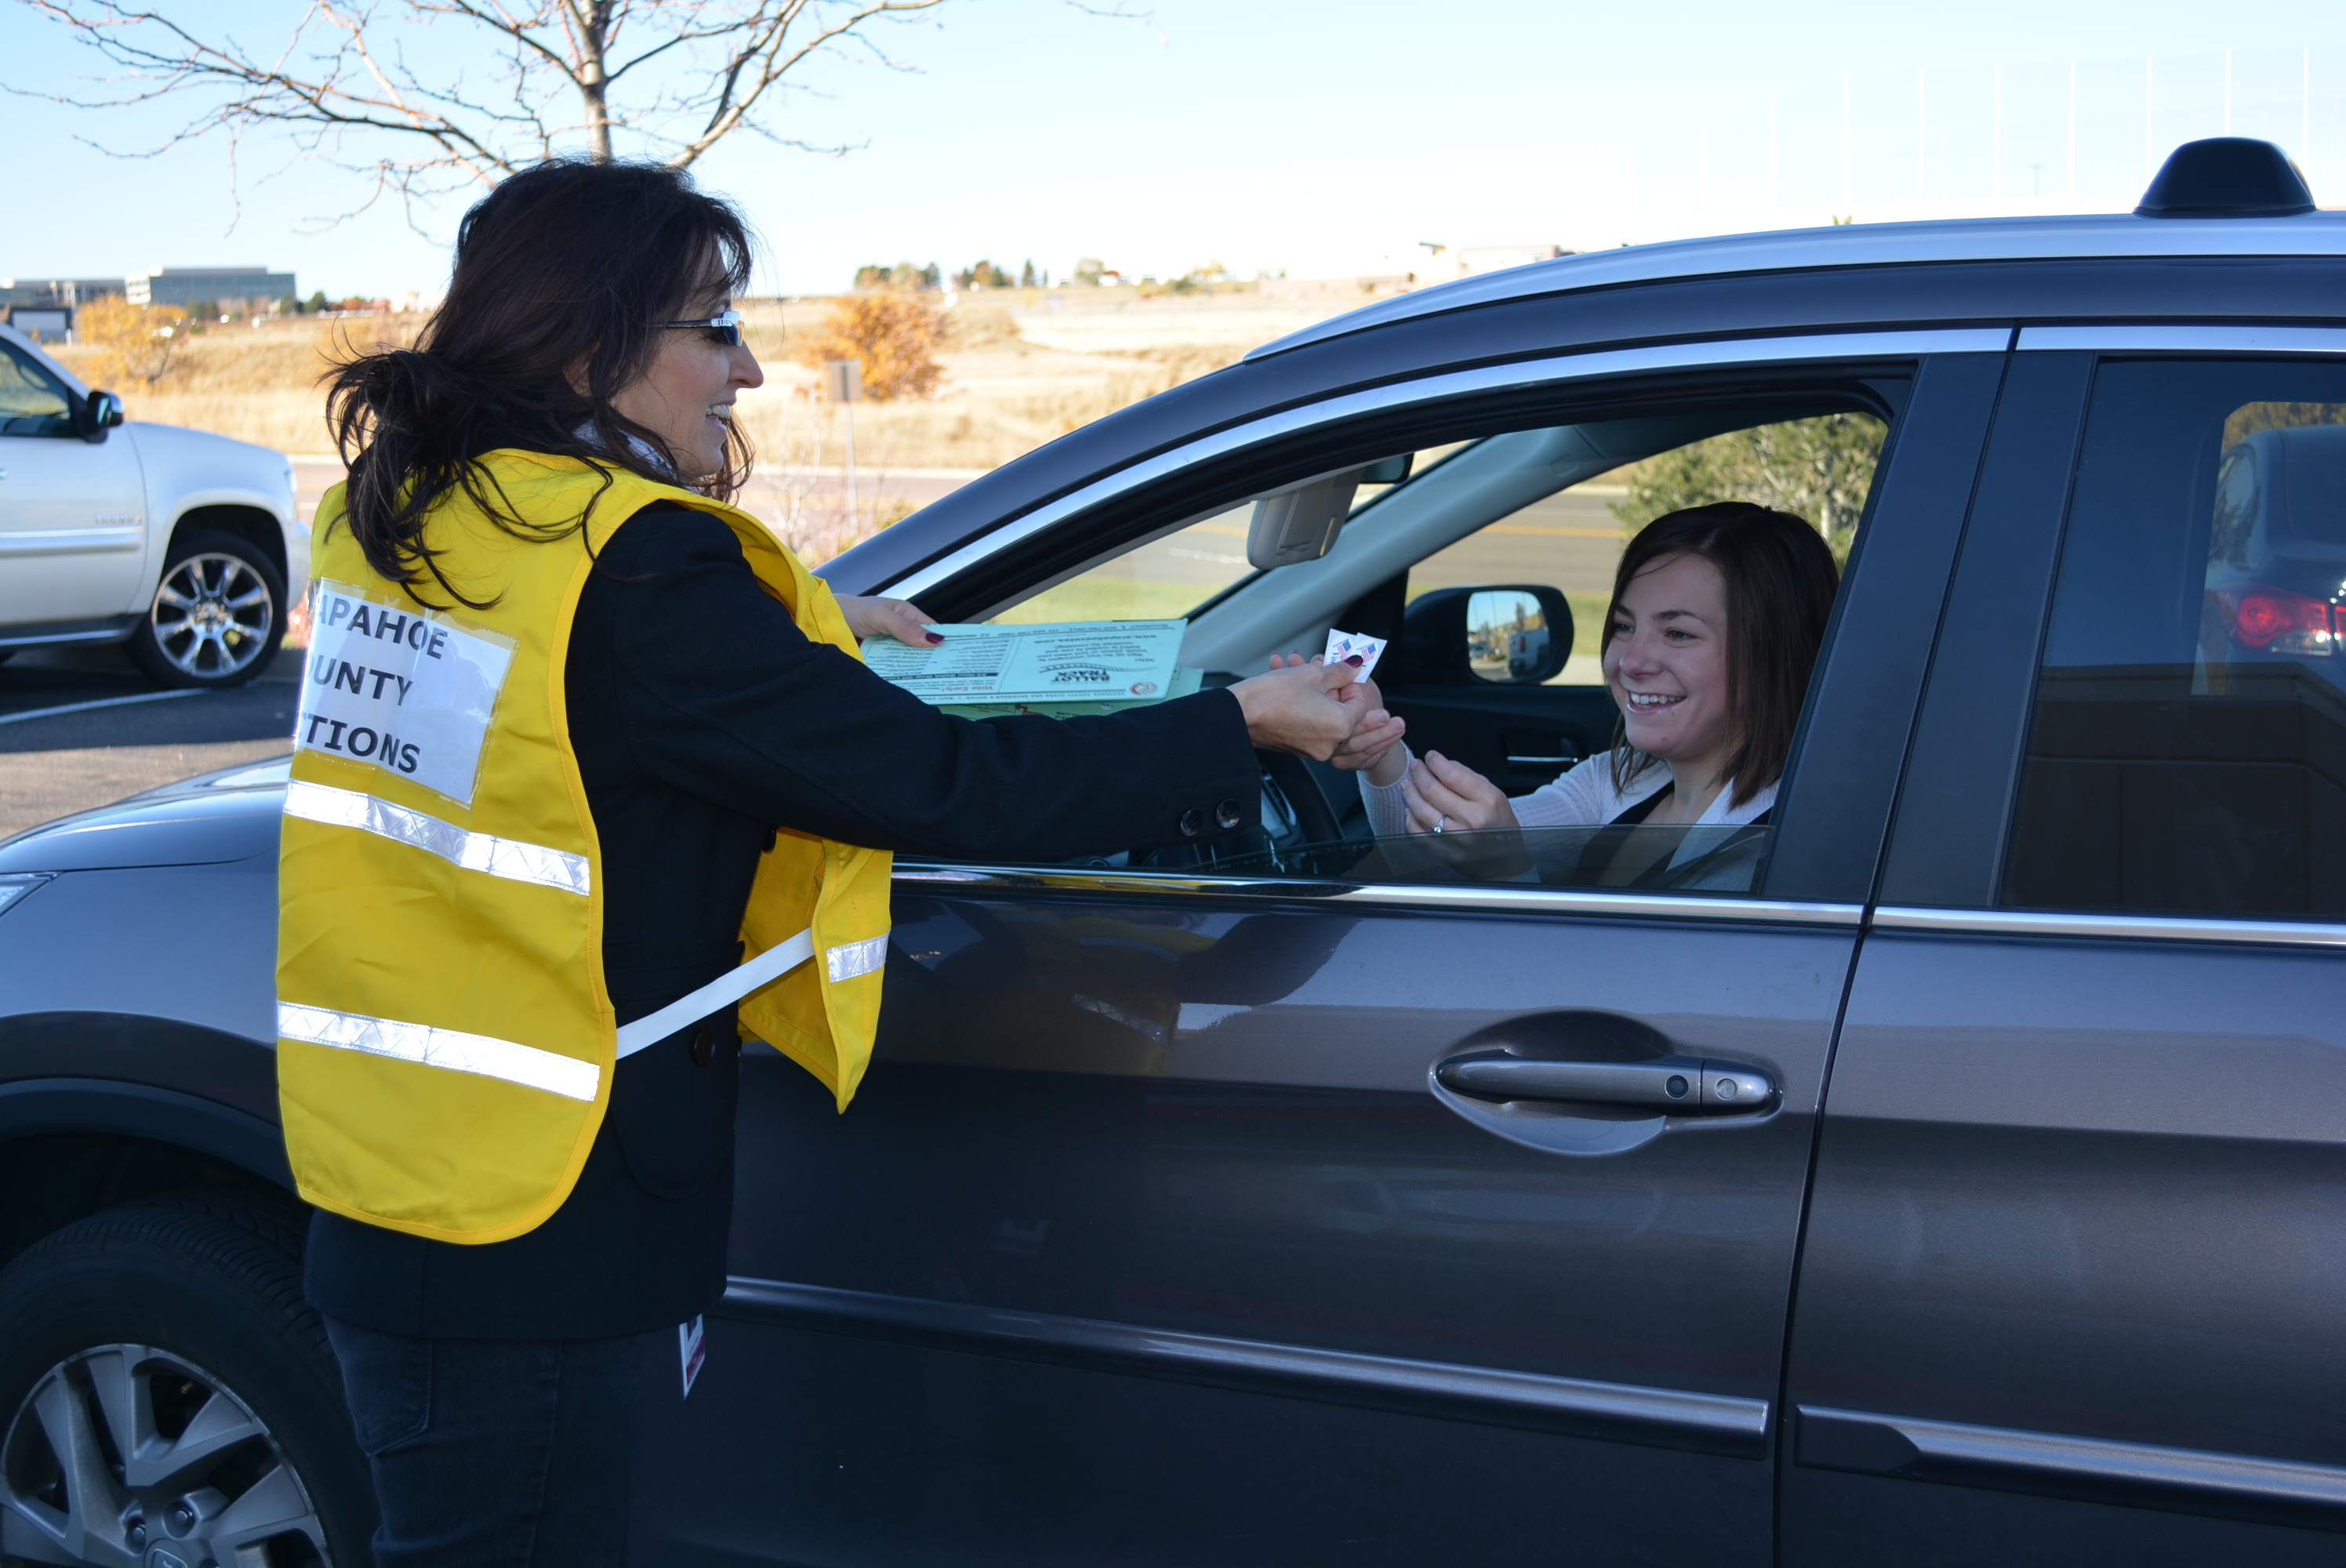 Voter in car delivers ballot to election worker at drive-up drop-off location